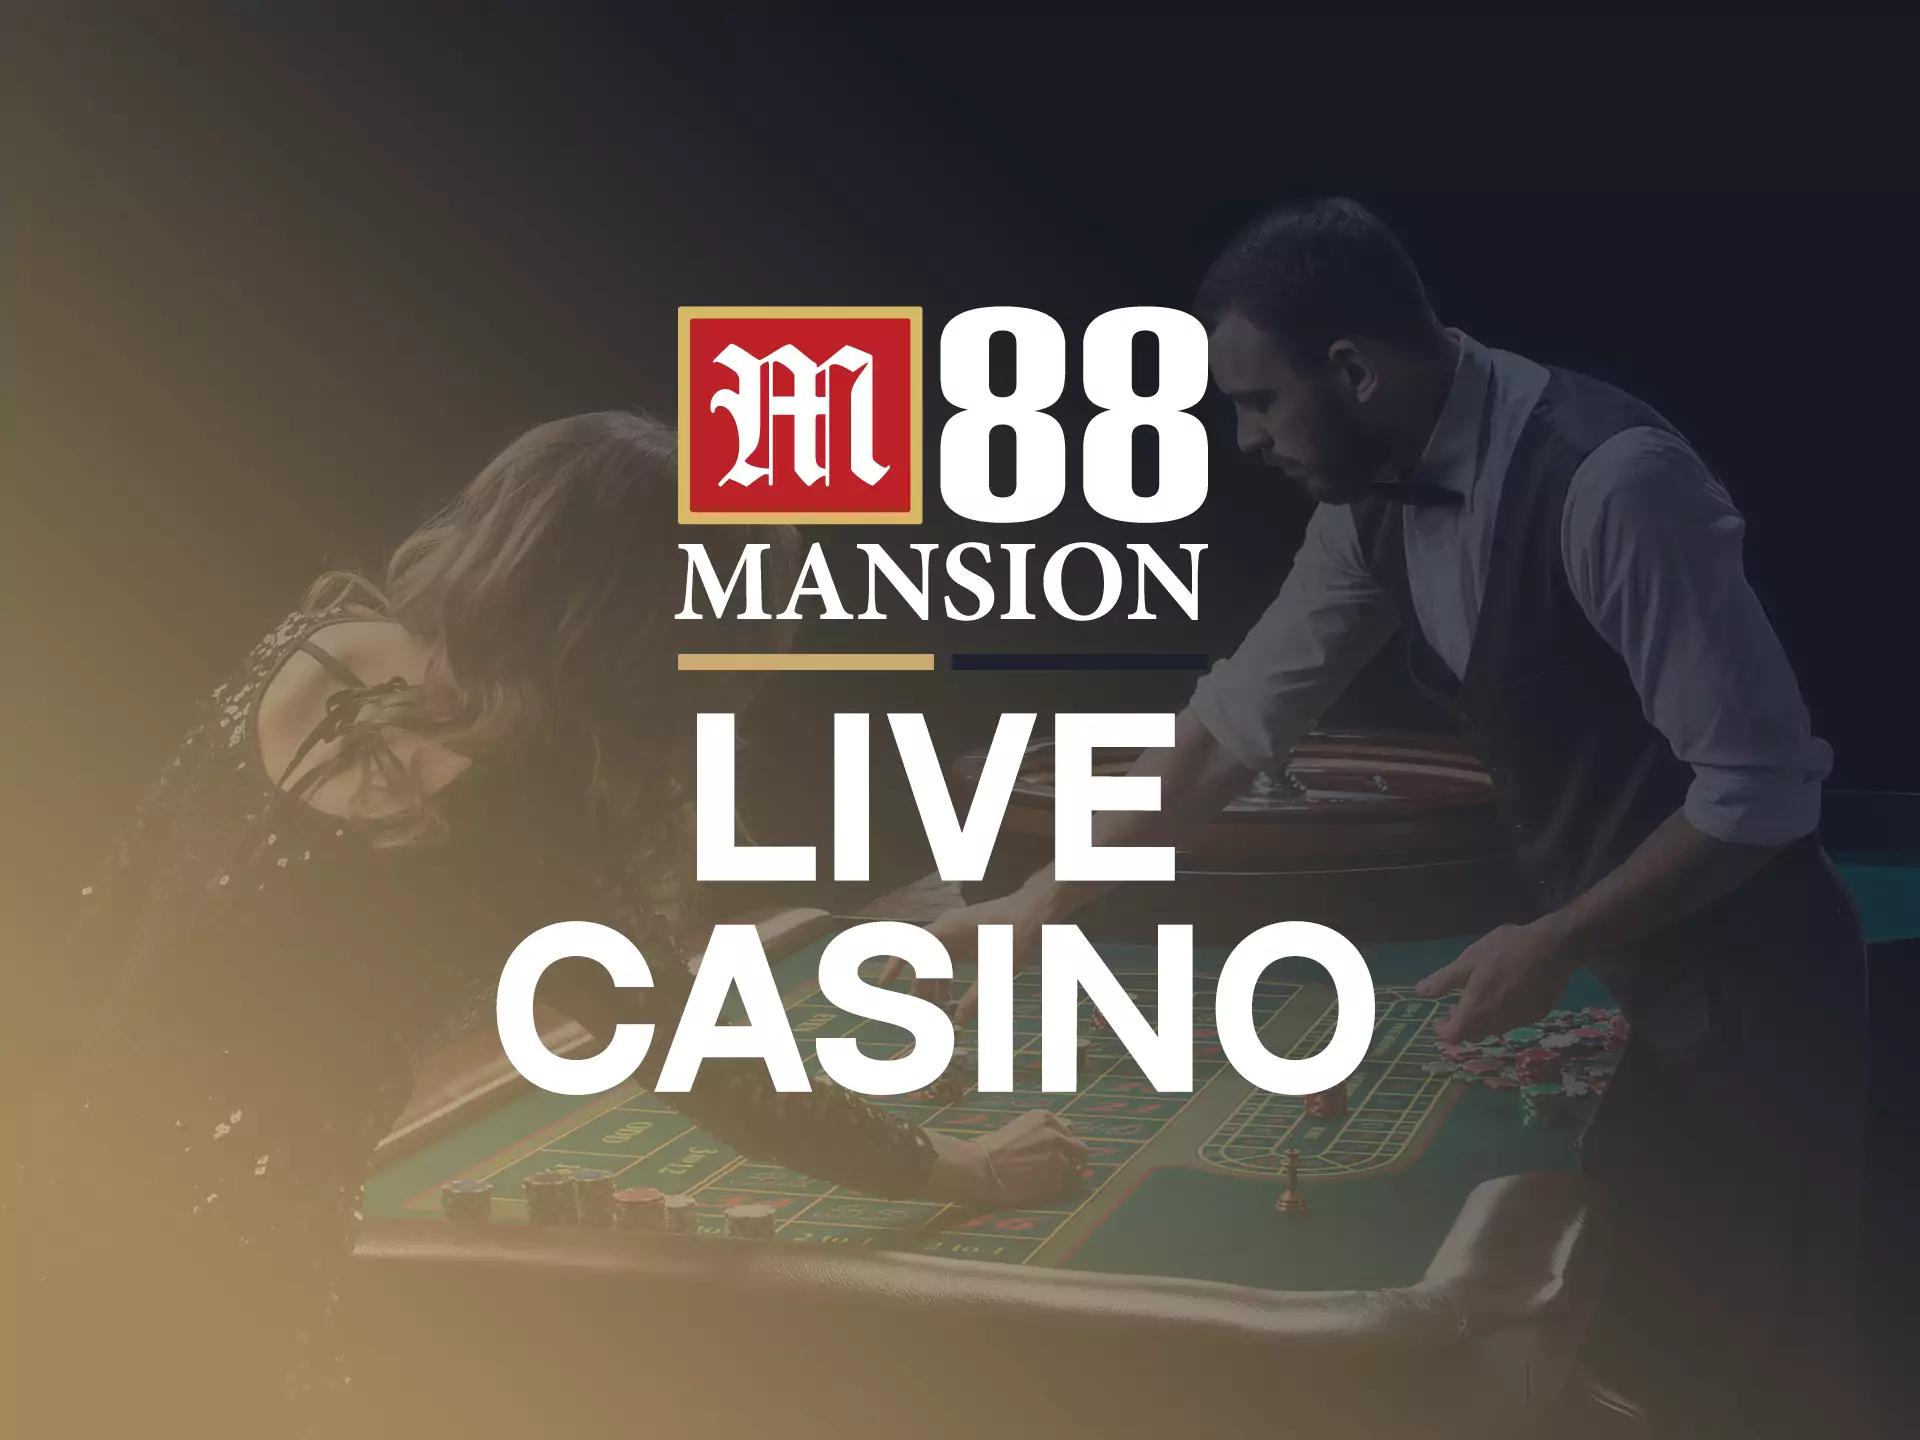 Meet a real dealer you can in the M88 live casino.